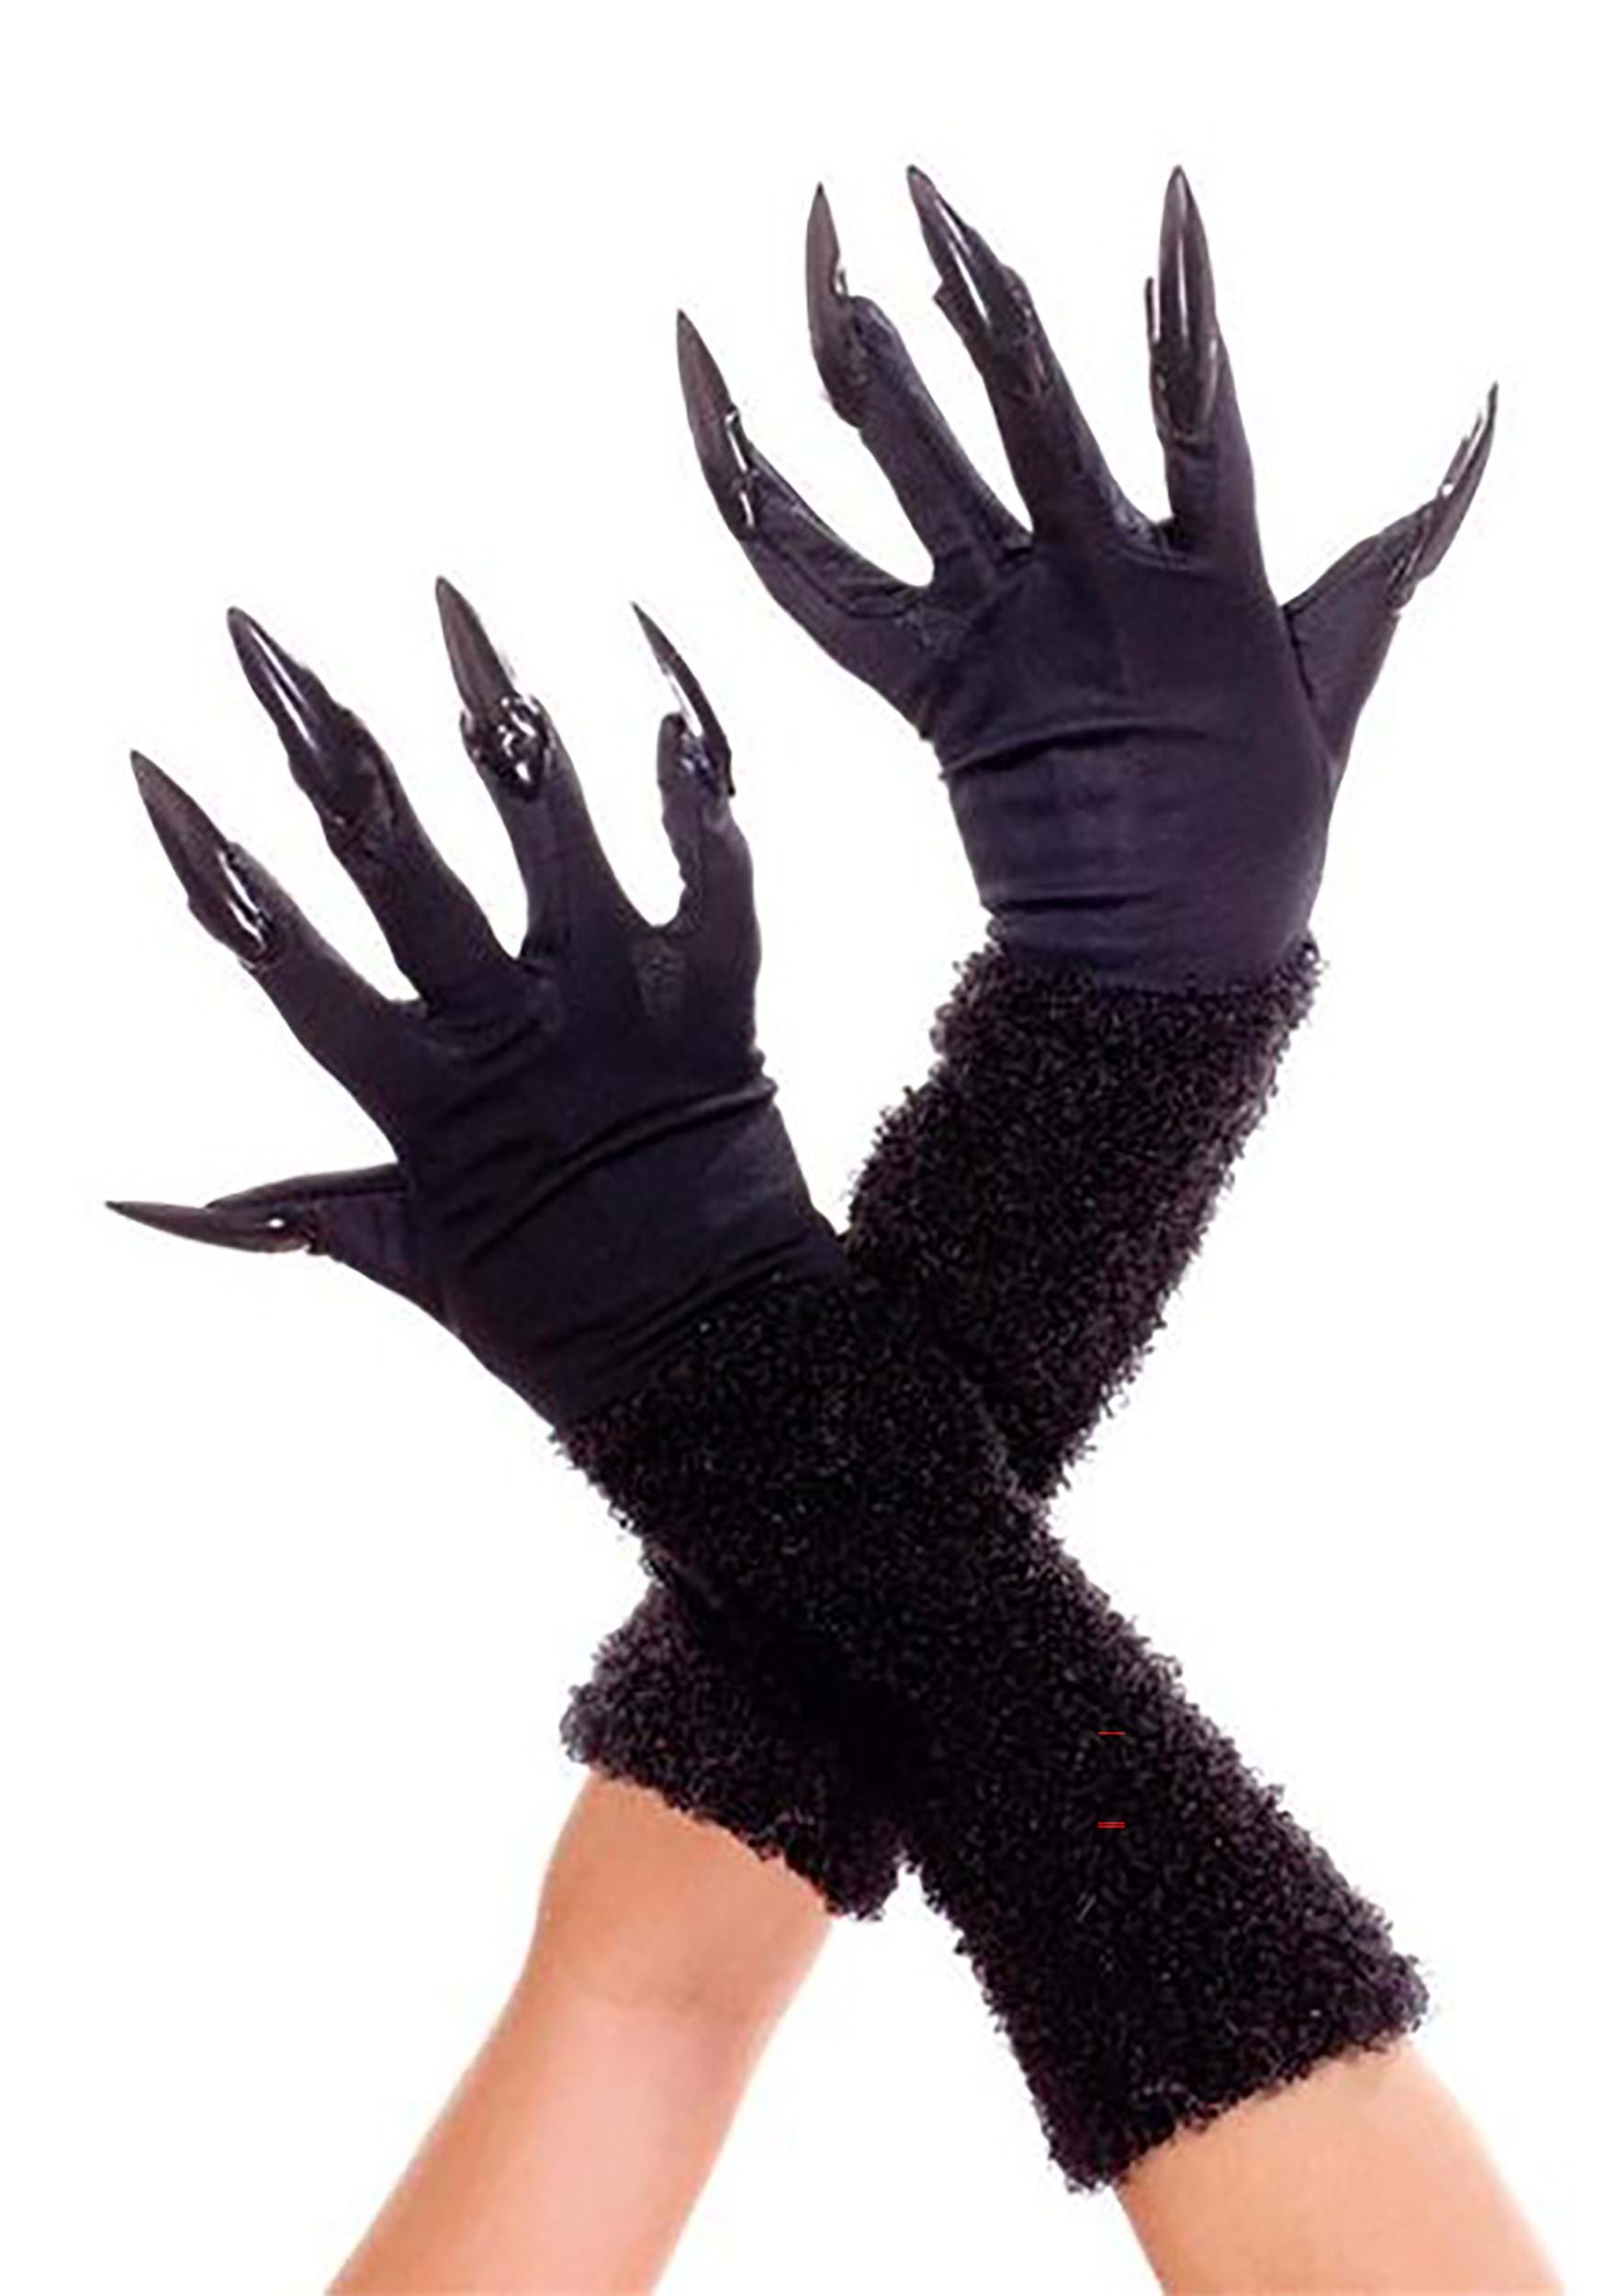 Black Furry Gloves With Nails For Women , Fancy Dress Costume Gloves